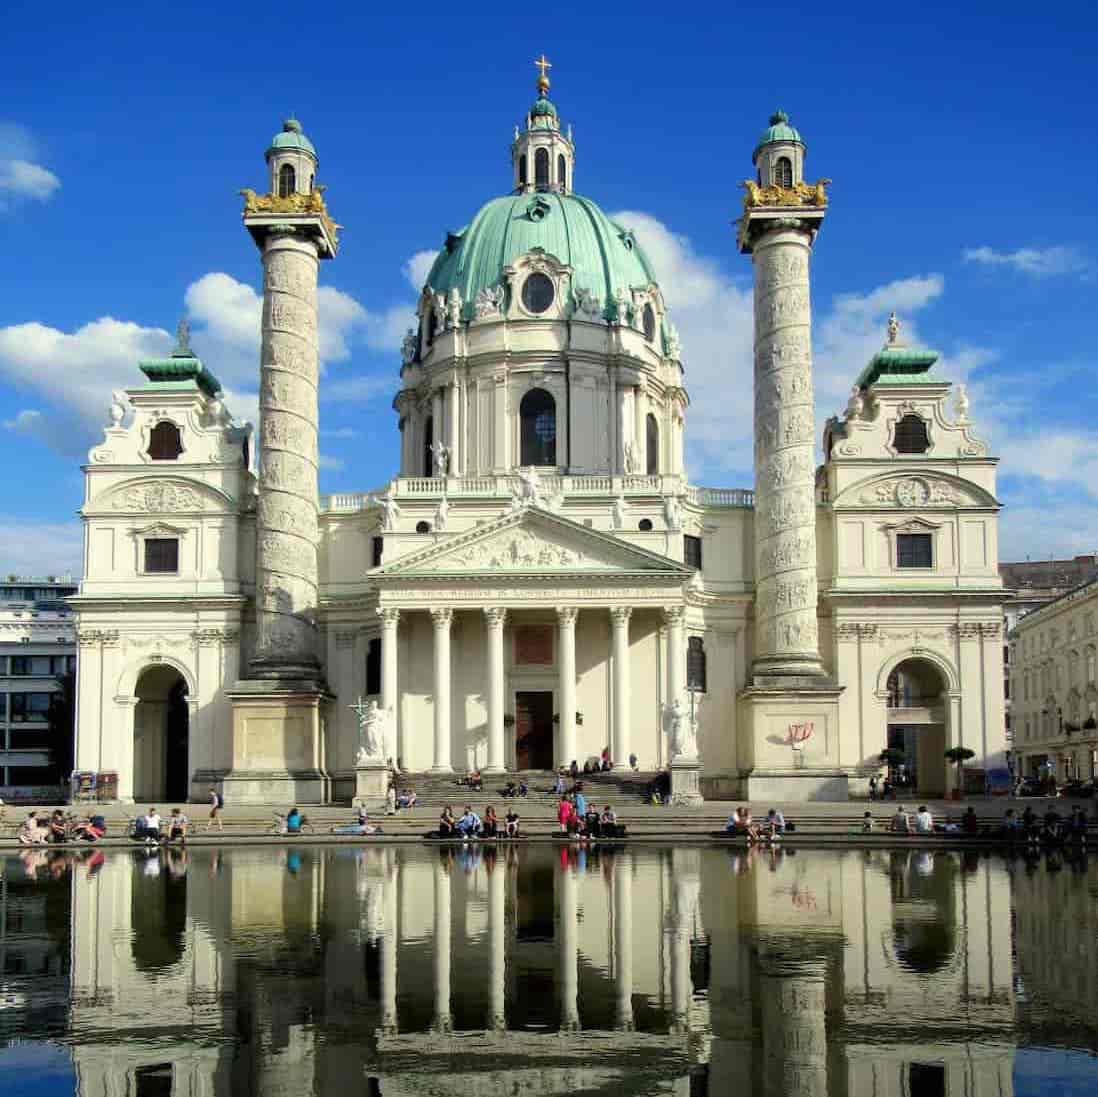 St. Charles Church in Vienna mirroring in water on a bright day